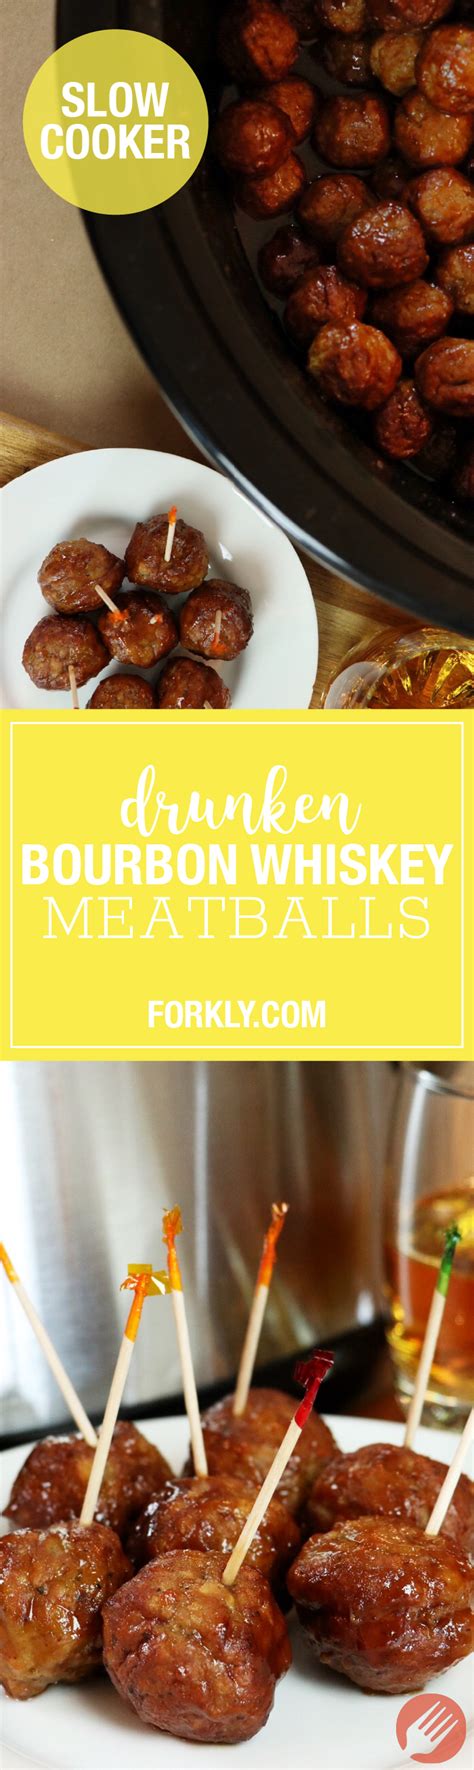 In a medium bowl combine marmalade, light brown sugar, bourbon, barbecue sauce, blackstrap molasses, and water with a whisk. Crockpot Drunken Bourbon Whiskey Meatballs - Forkly